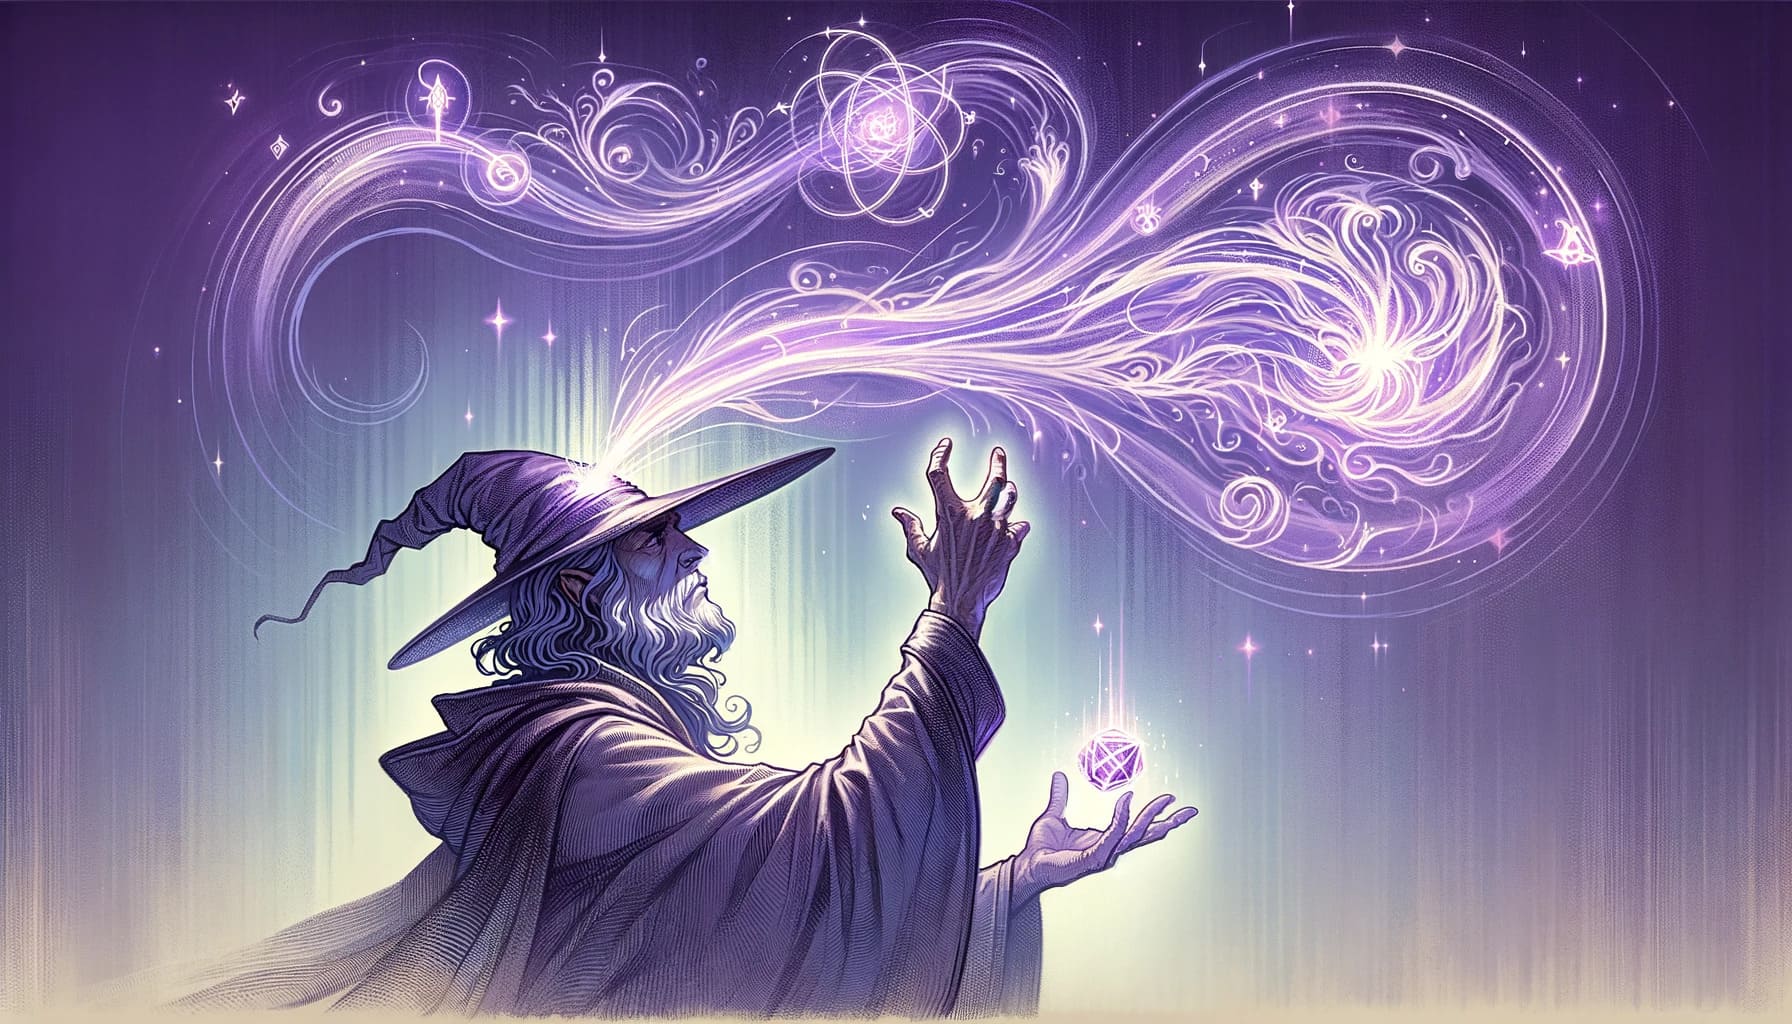 A wizard in the midst of casting the Mind Sliver spell. The wizard, with clear features and a focused expression, is depicted in a casting pose. A stream of mystical purple energy, representing the psychic power of Mind Sliver, emanates from the wizard's head, swirling around them. The background blends subtle magical symbols with a gradient of purple shades, creating a mystical ambiance.